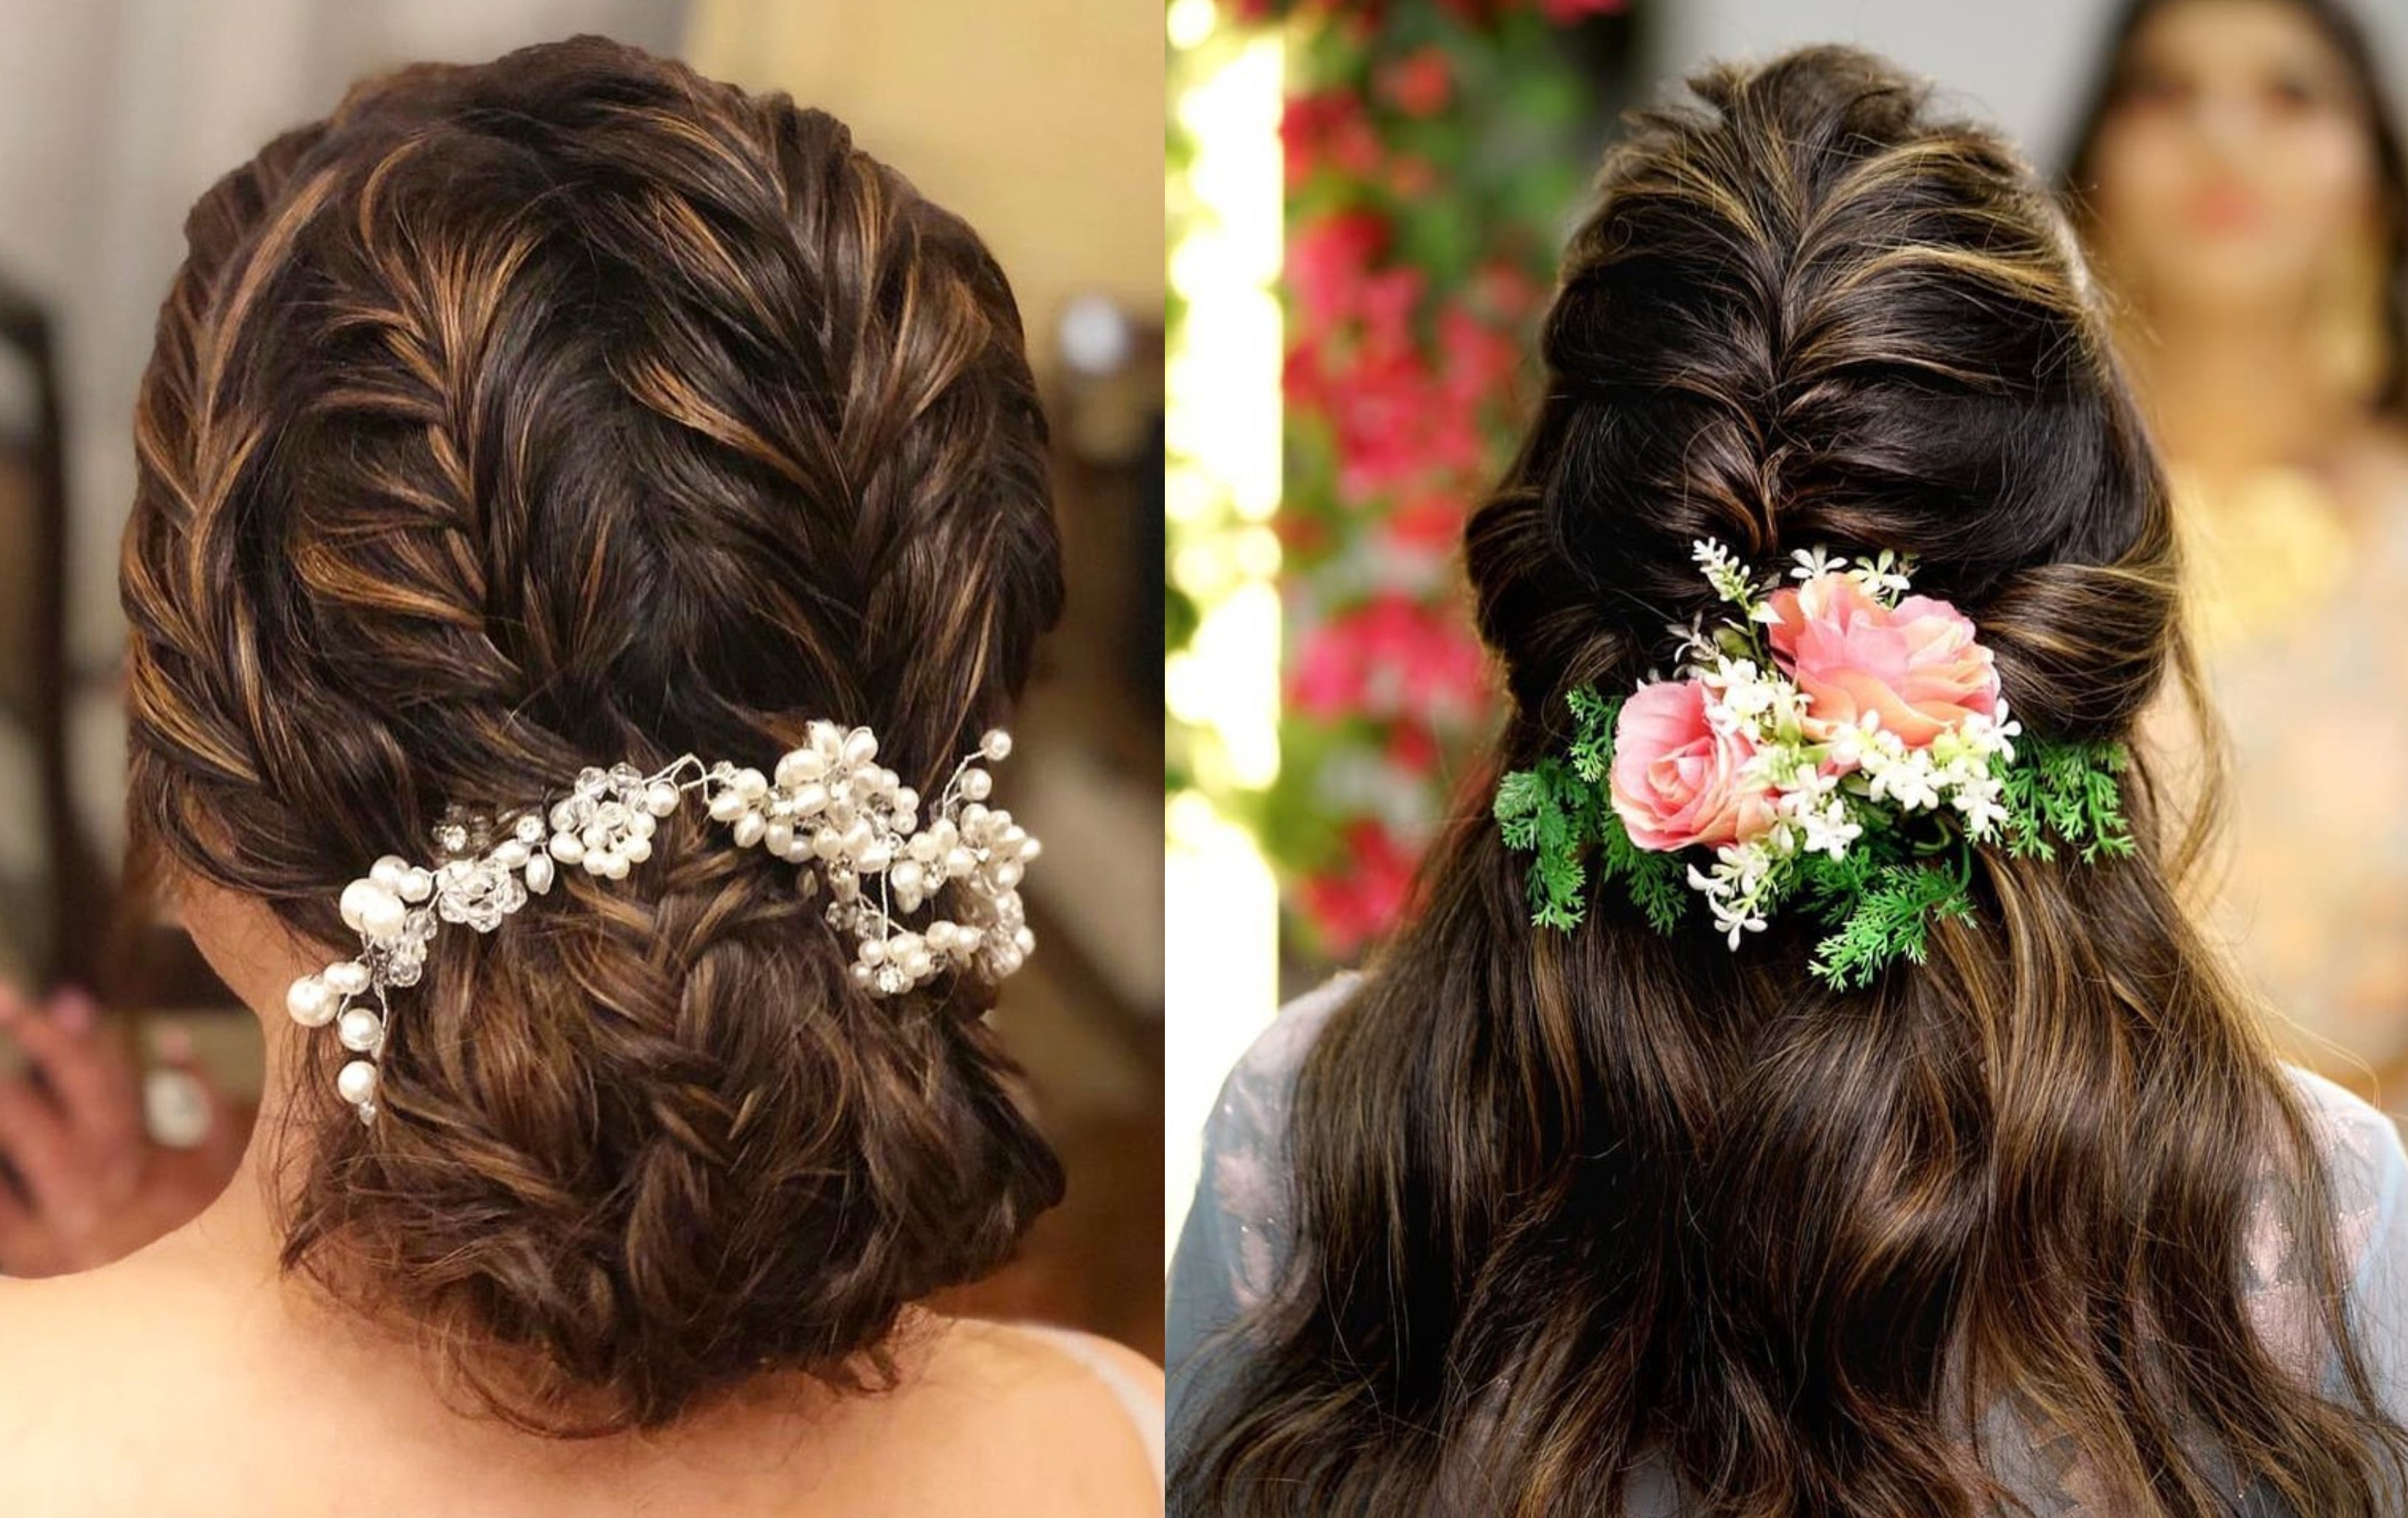 32 Magnificent South Indian Bridal Hairstyles - ShaadiWish